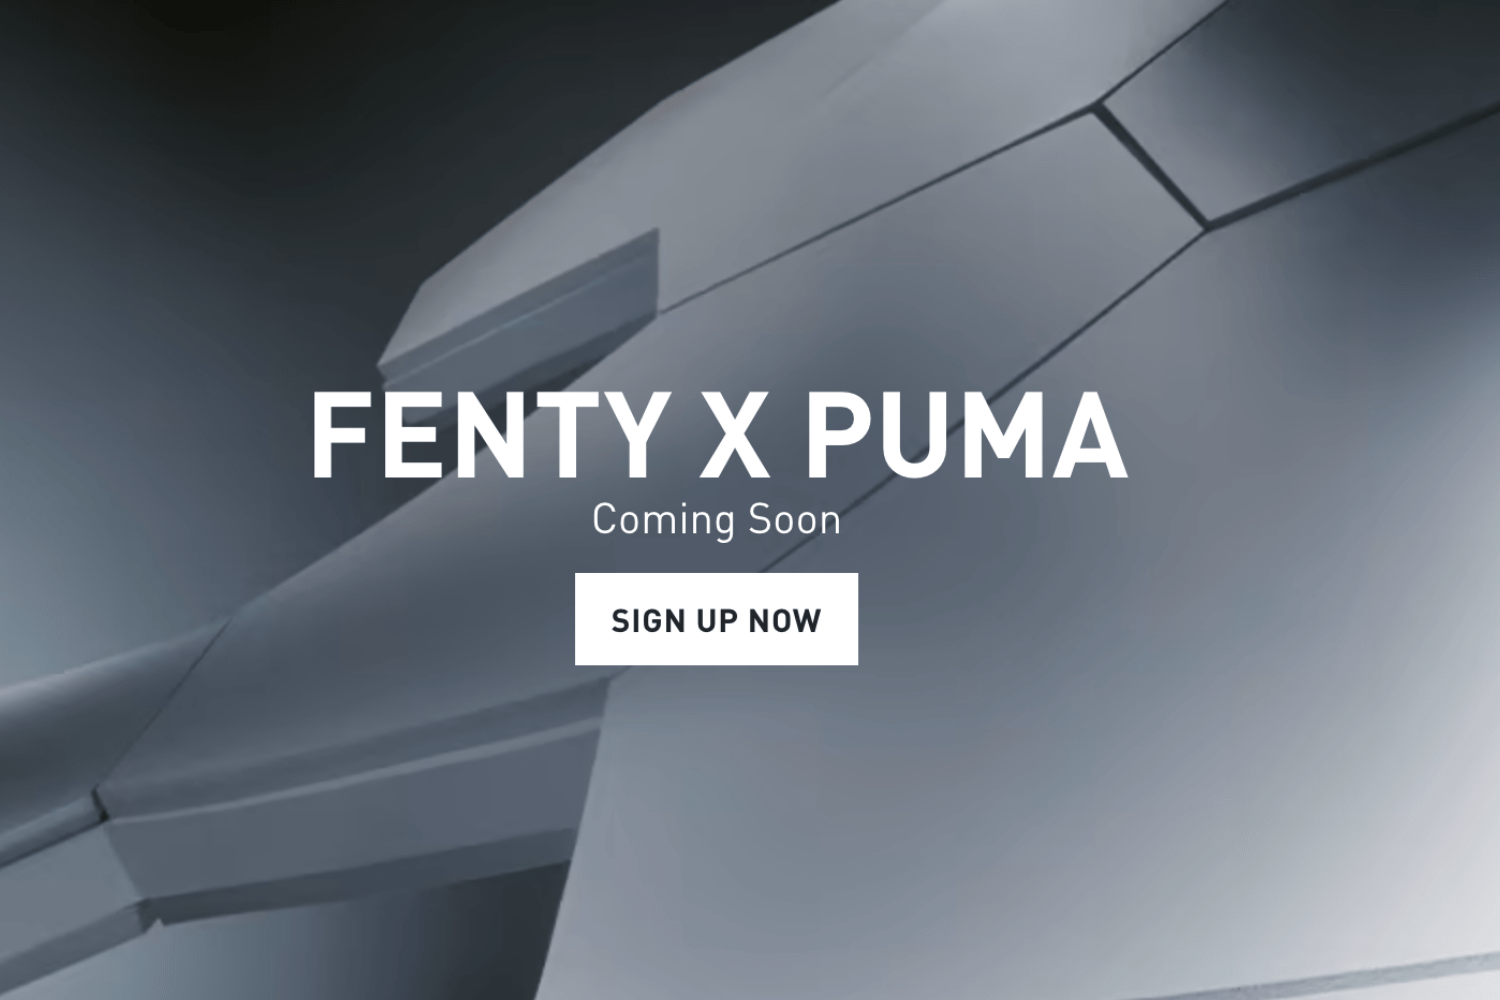 Be the first to get all the info on the new FENTY x PUMA collection